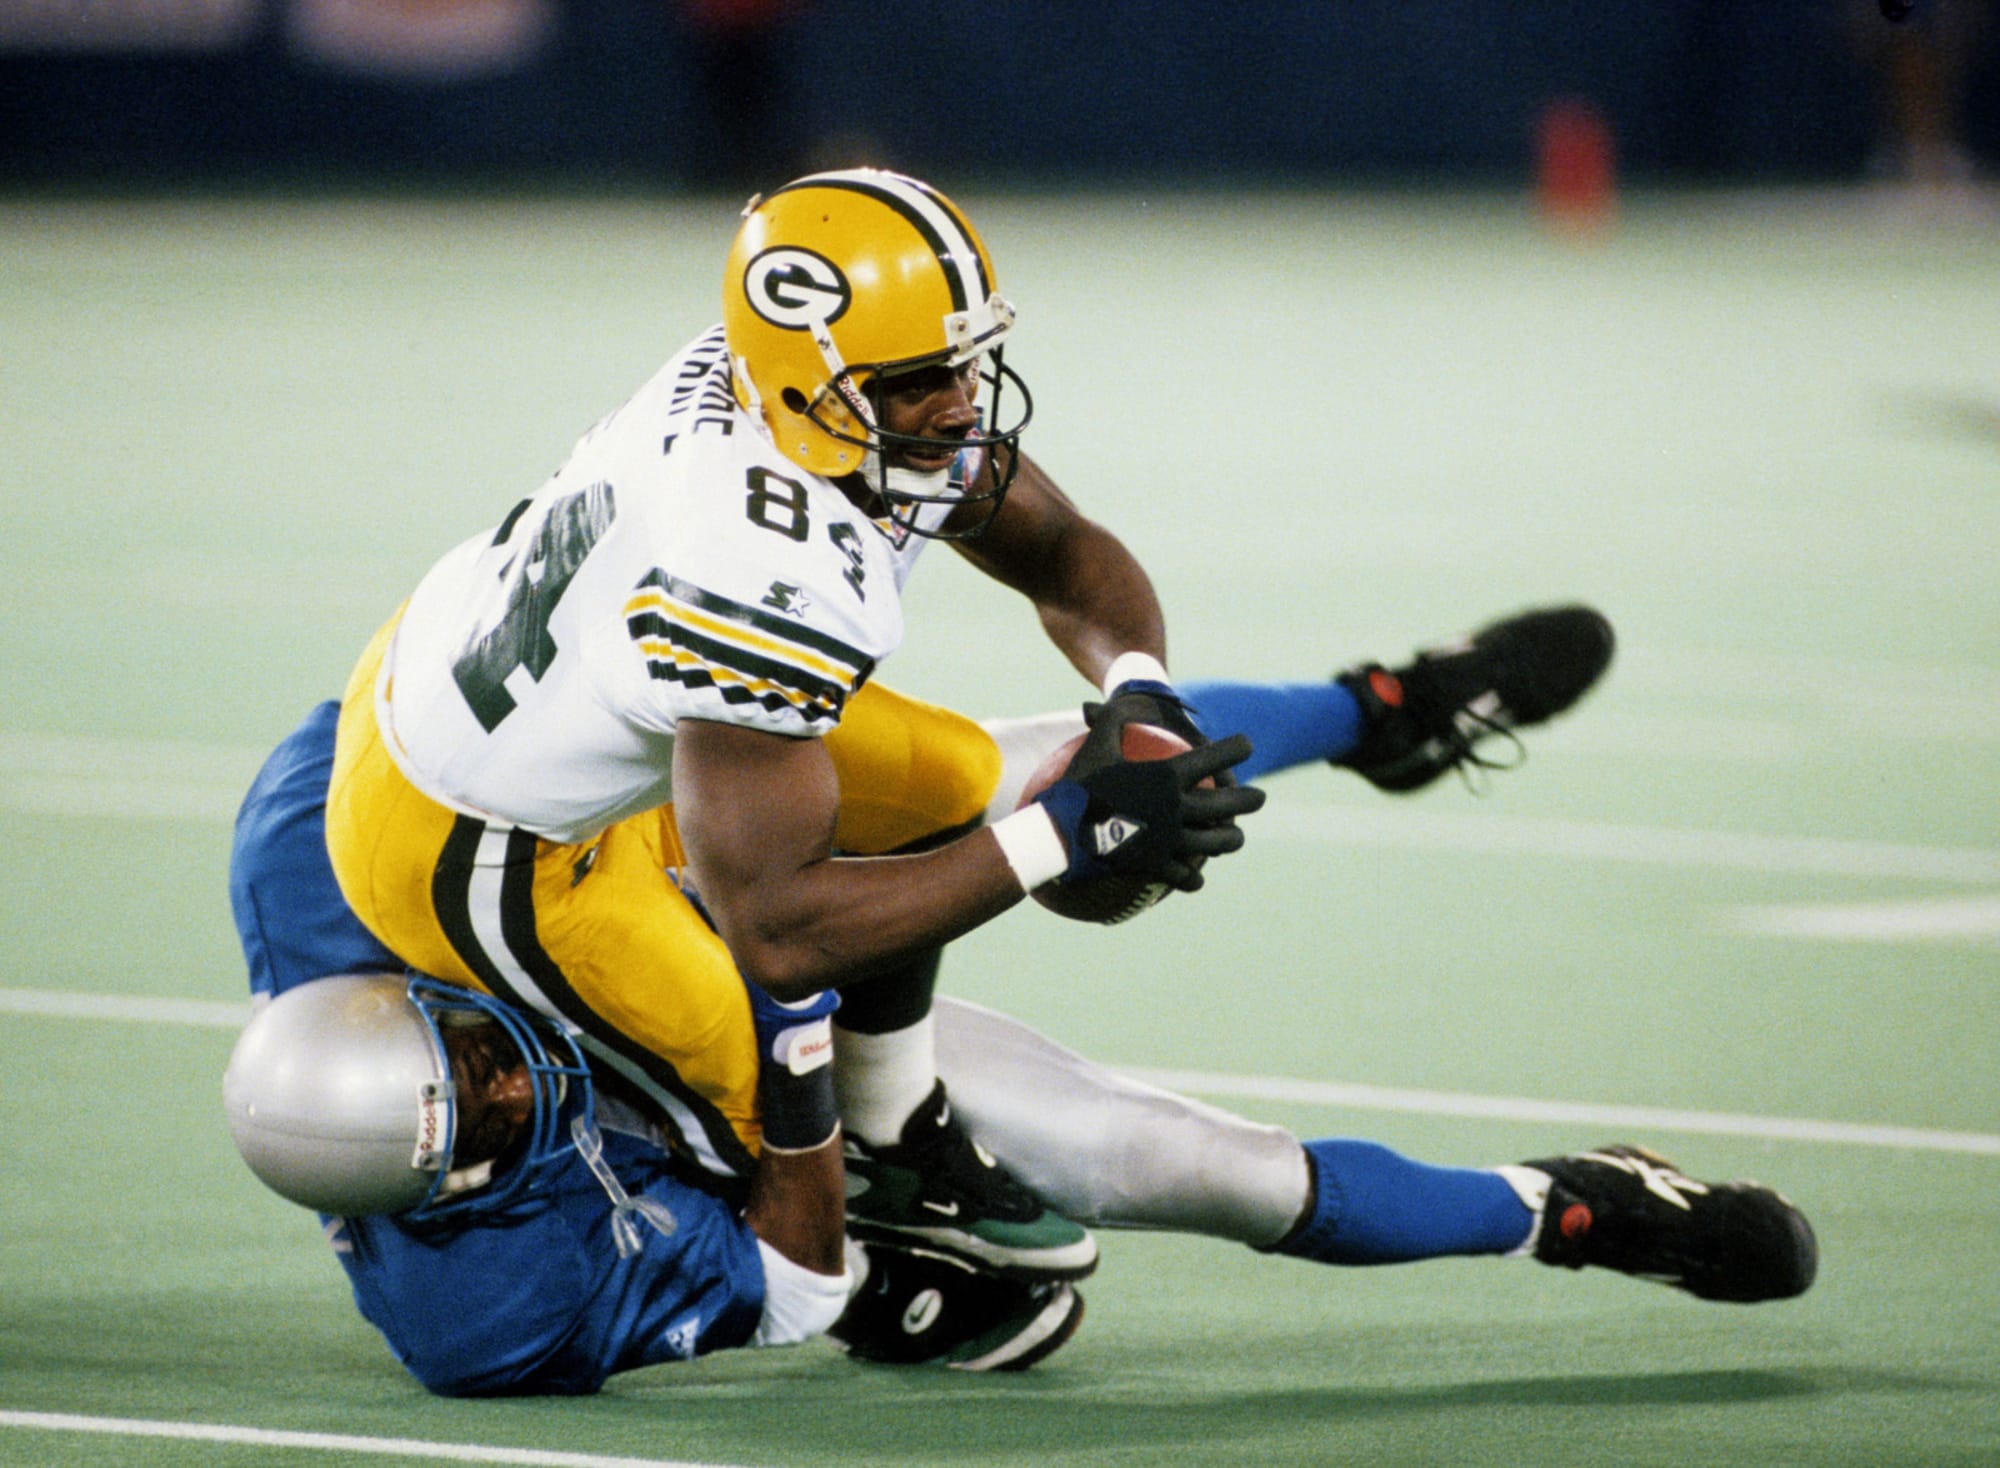 Former Packers WR Sterling Sharpe is one step closer to entering the Hall of Fame